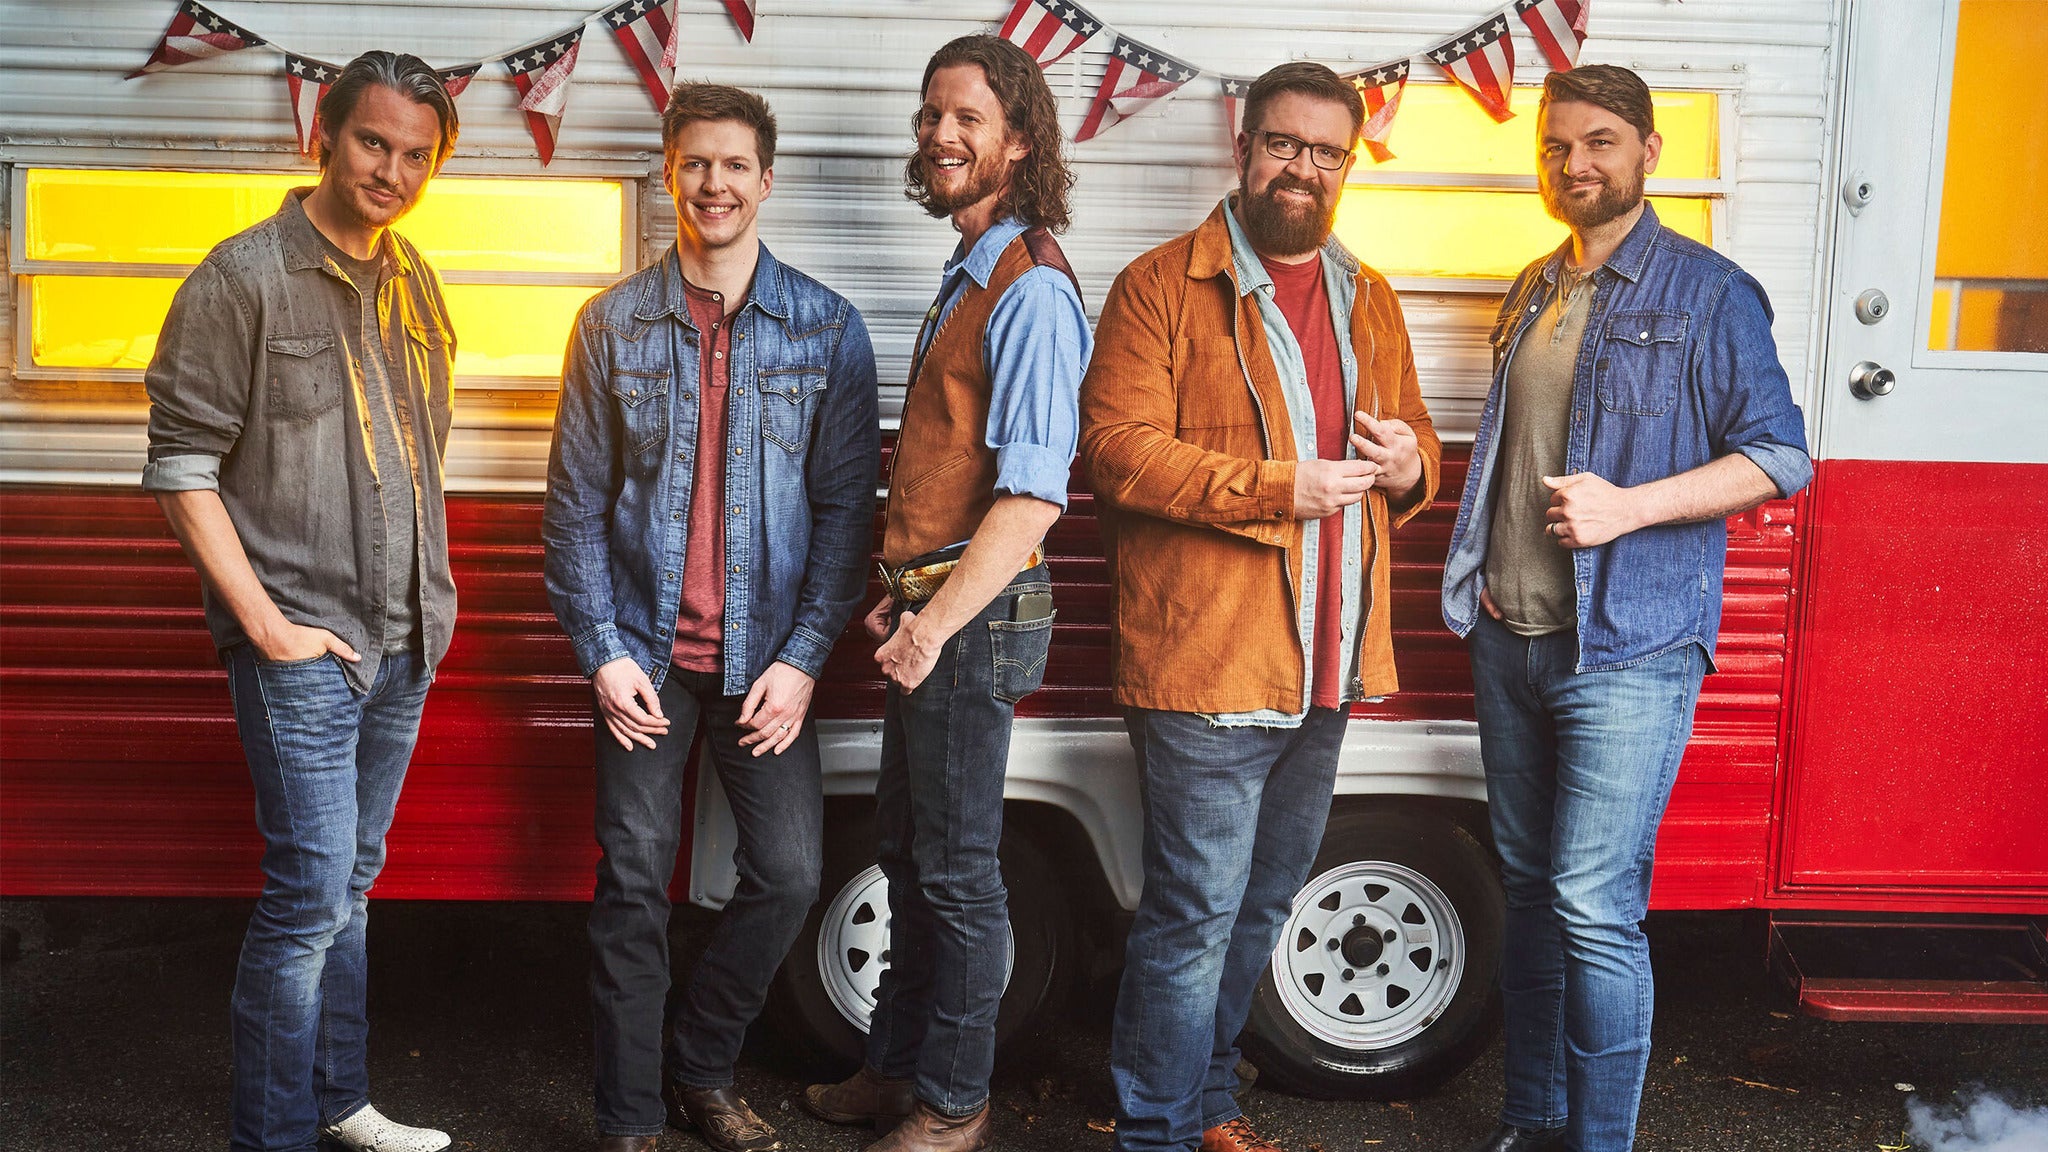 Home Free: Road Sweet Road Tour pre-sale code for event tickets in San Diego, CA (Balboa Theatre)